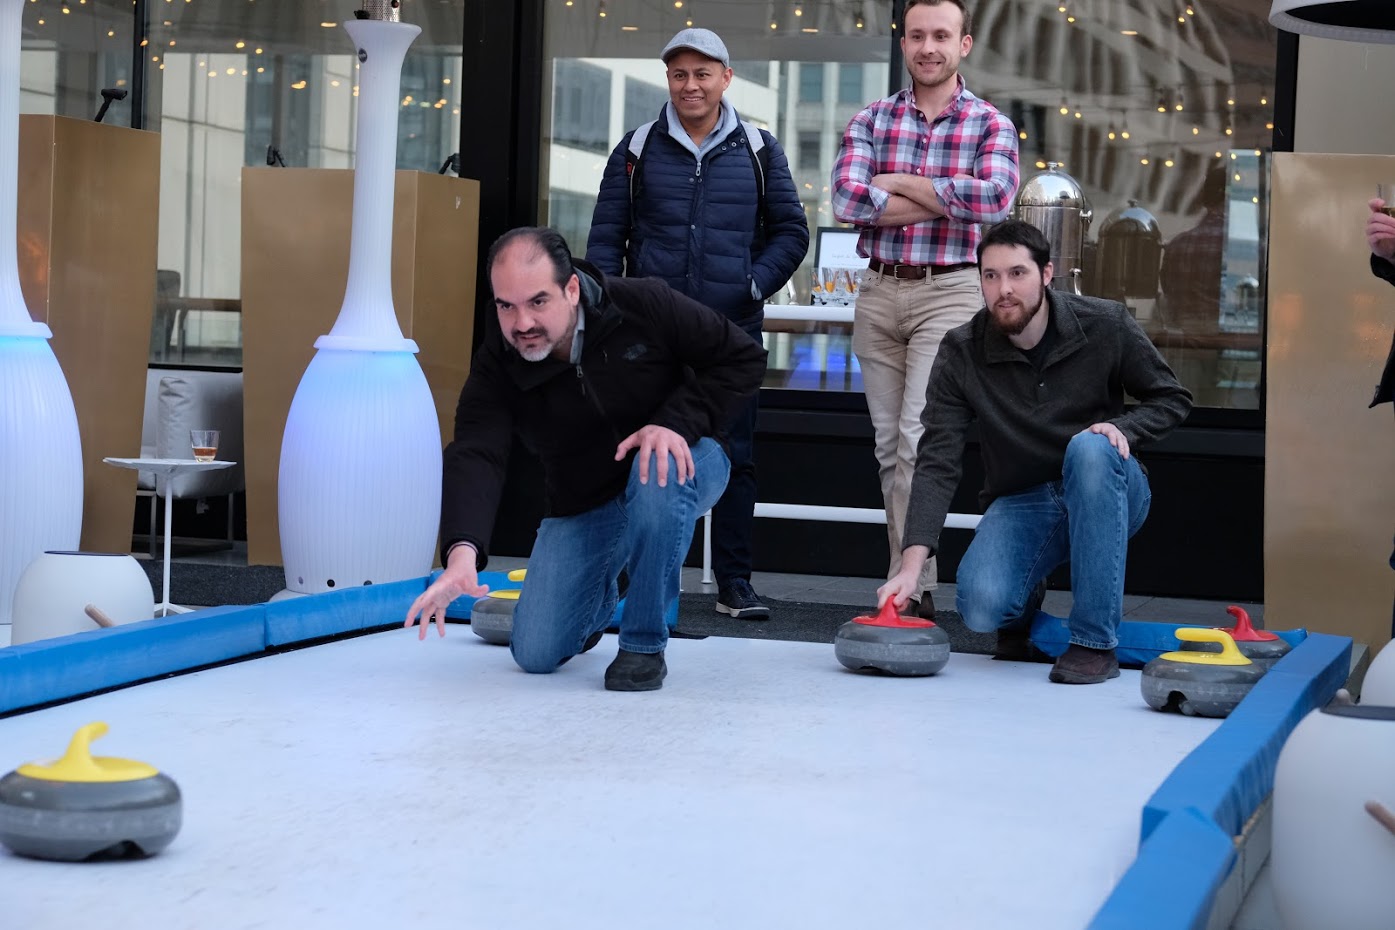 Teams compete in a rooftop curling competition.